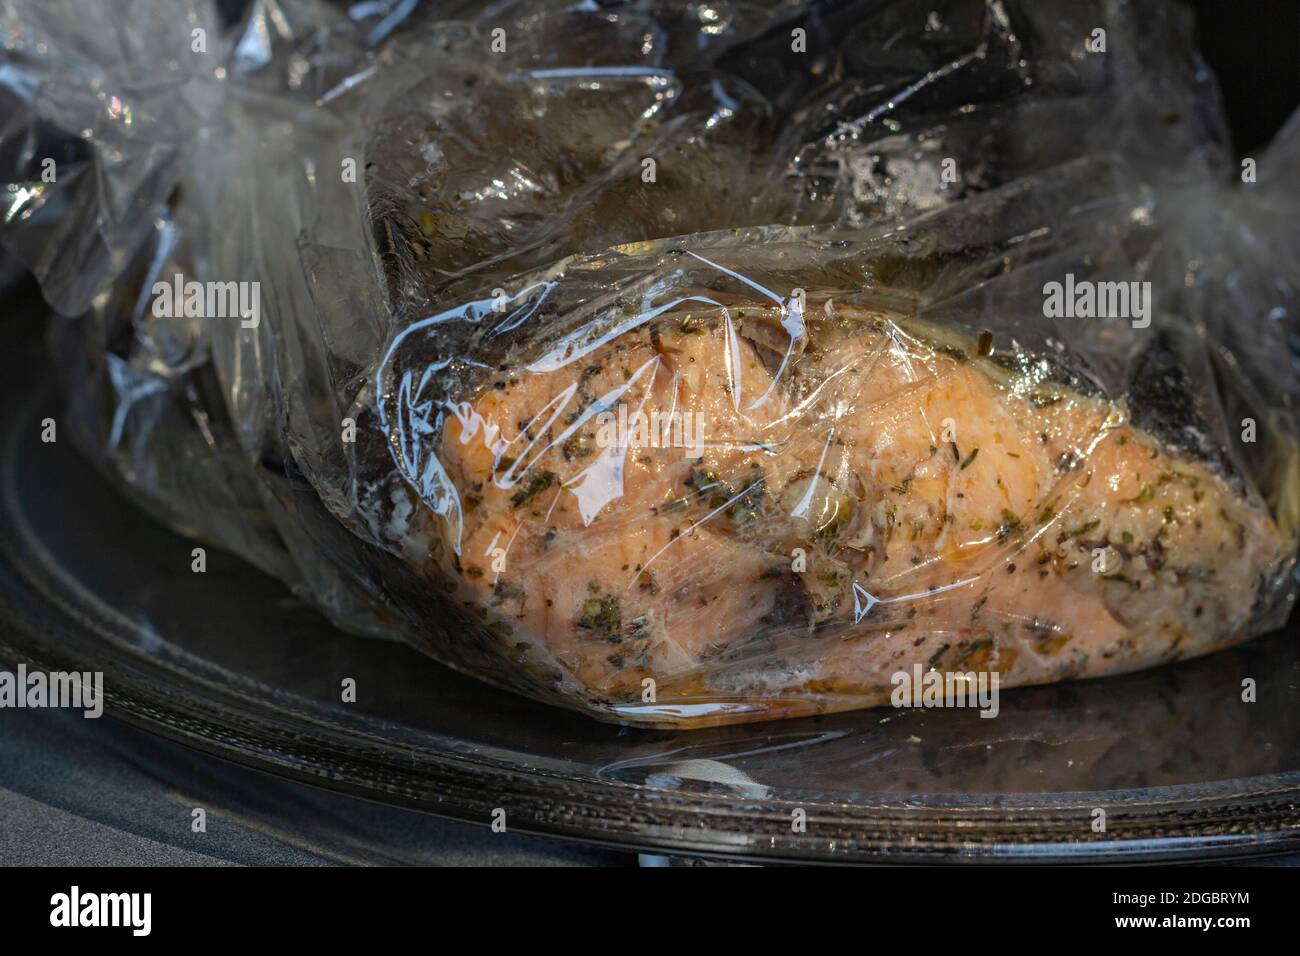 Spiced fresh trout fish wrapped in a baking sleeve in a microvawe oven, cooked, closeup view Stock Photo